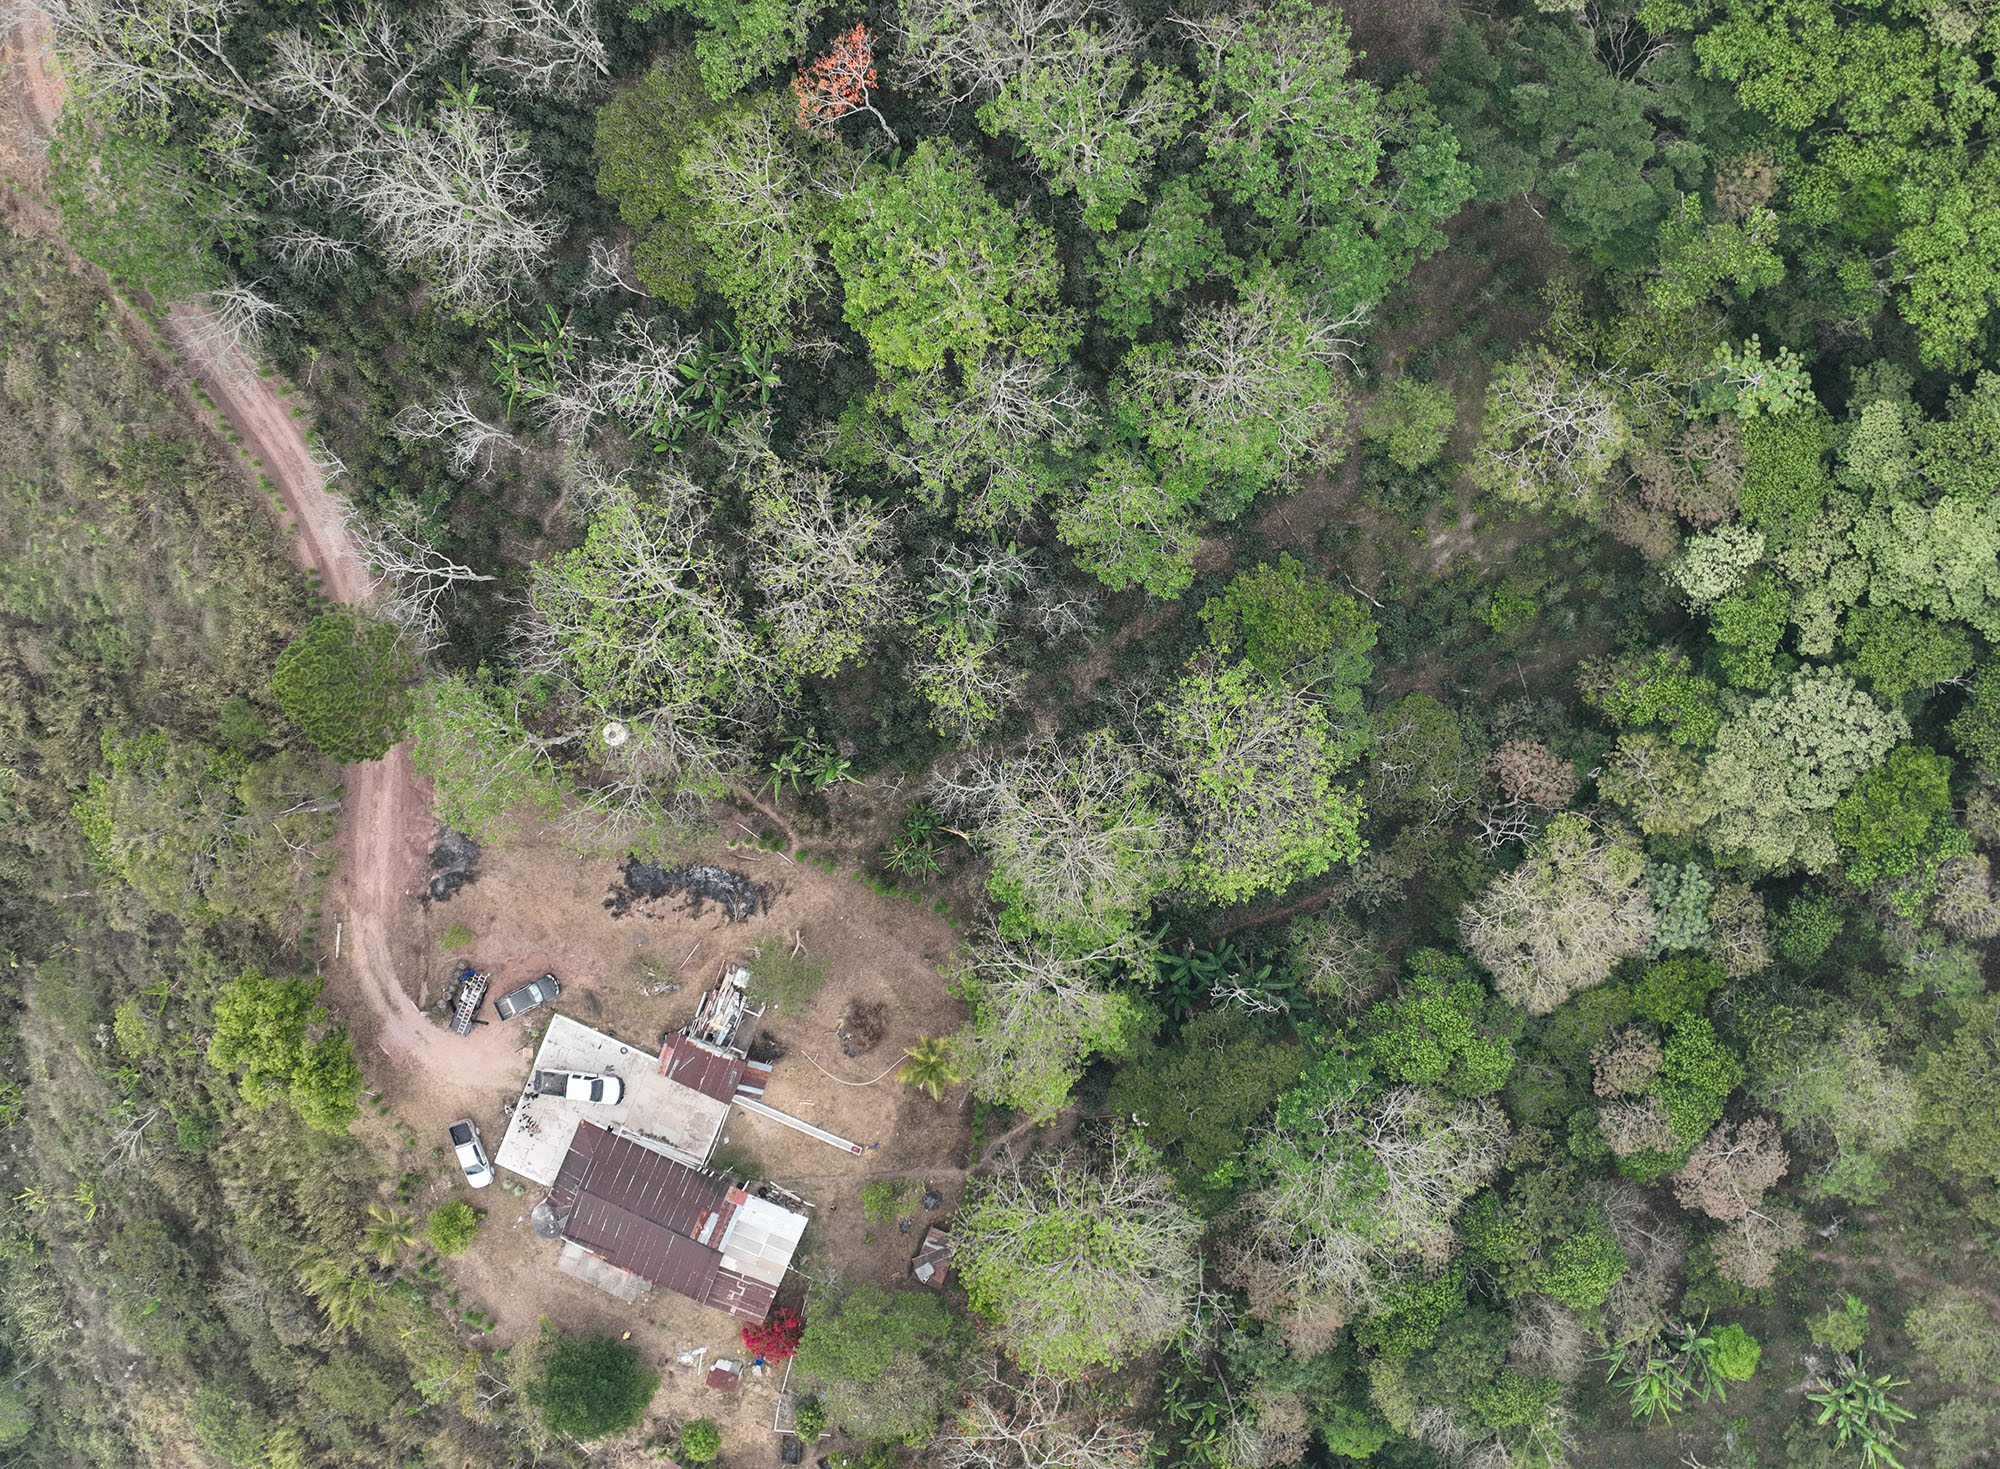 Coffee plantation as see from the drone